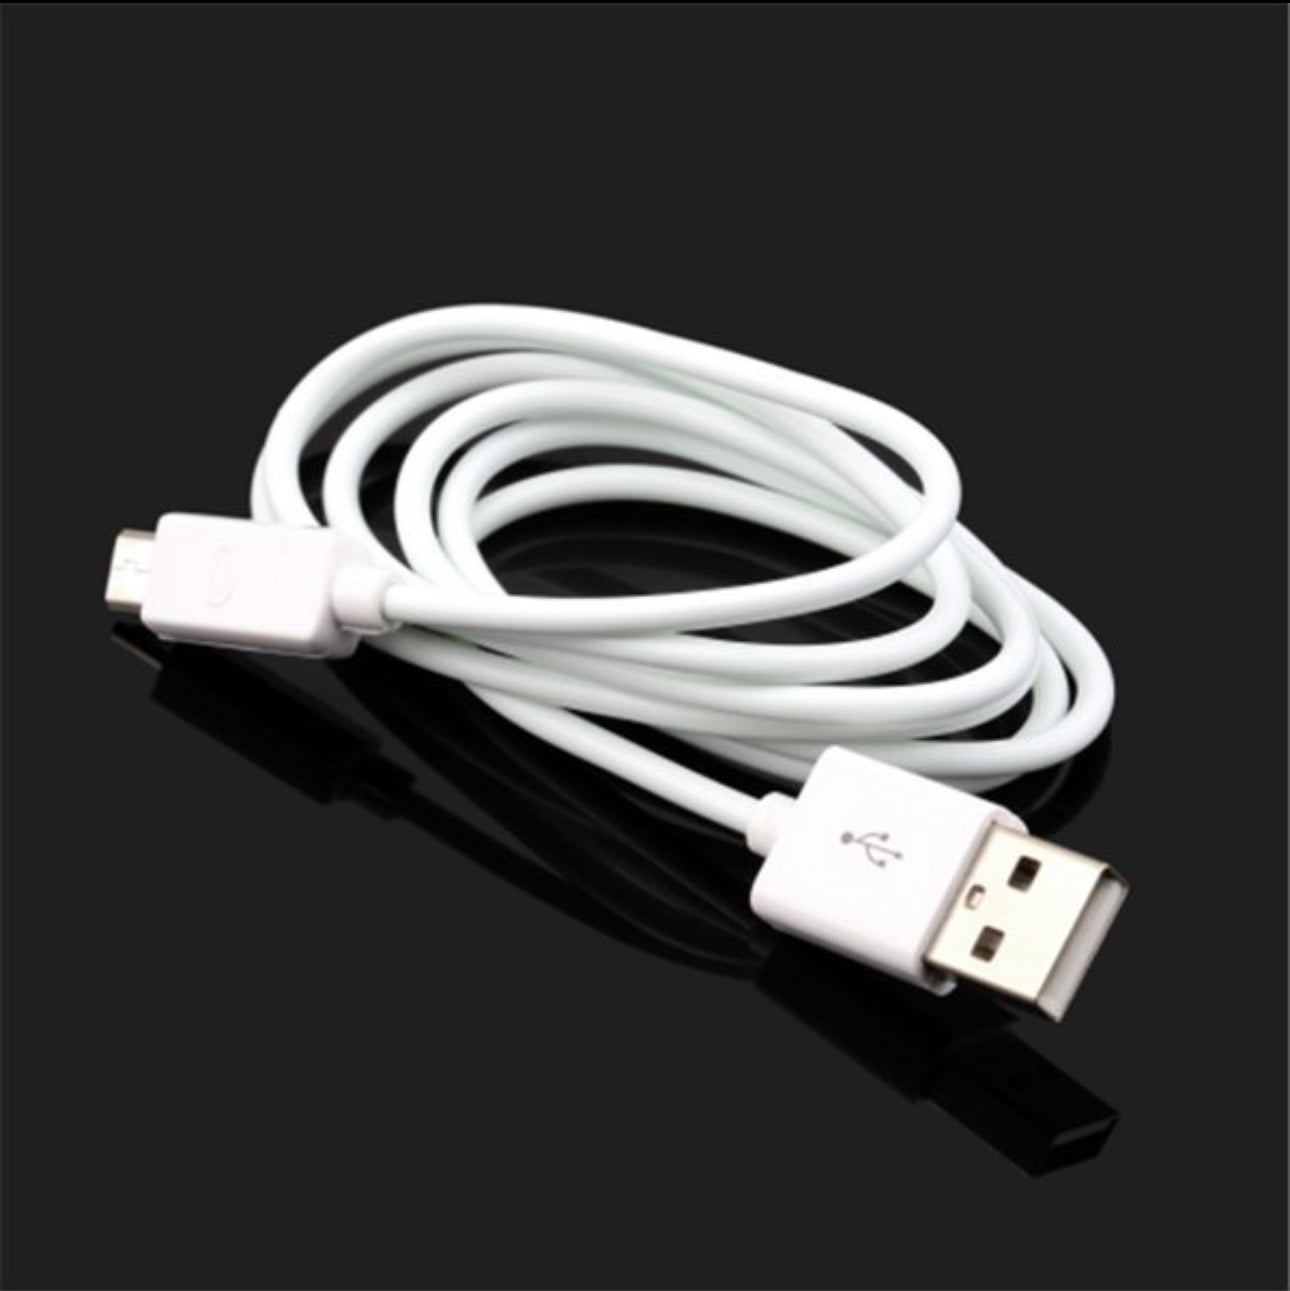 Micro USB Cable - 100cm long